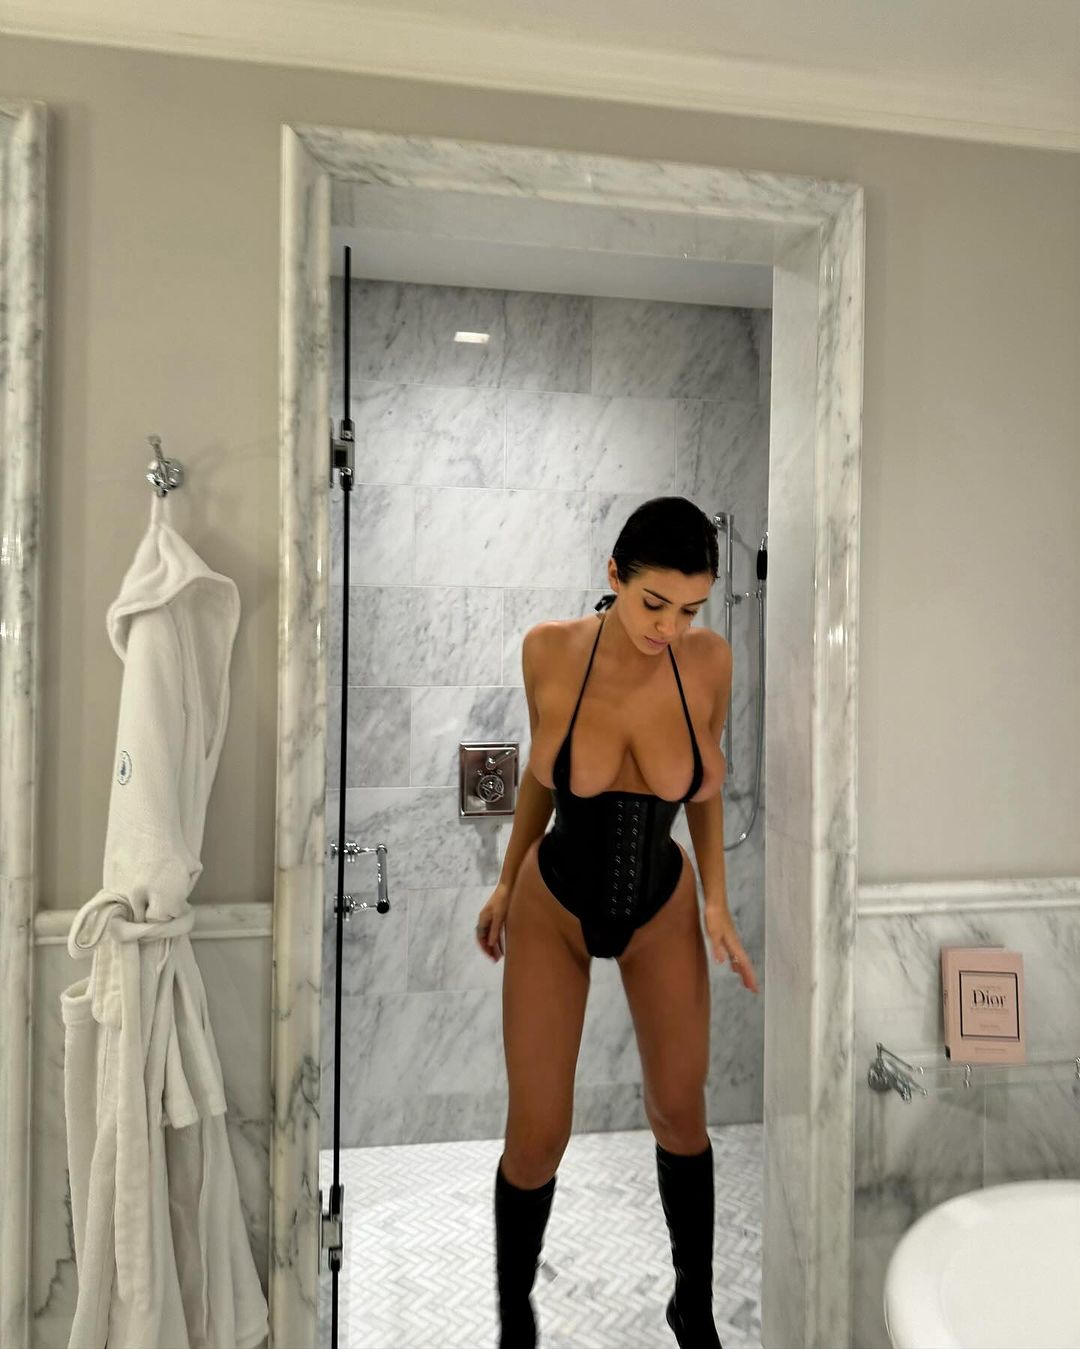 Ye Declares “No Pants This Year” As He Shares Revealing Snaps of His Wife Bianca! - Photo 1